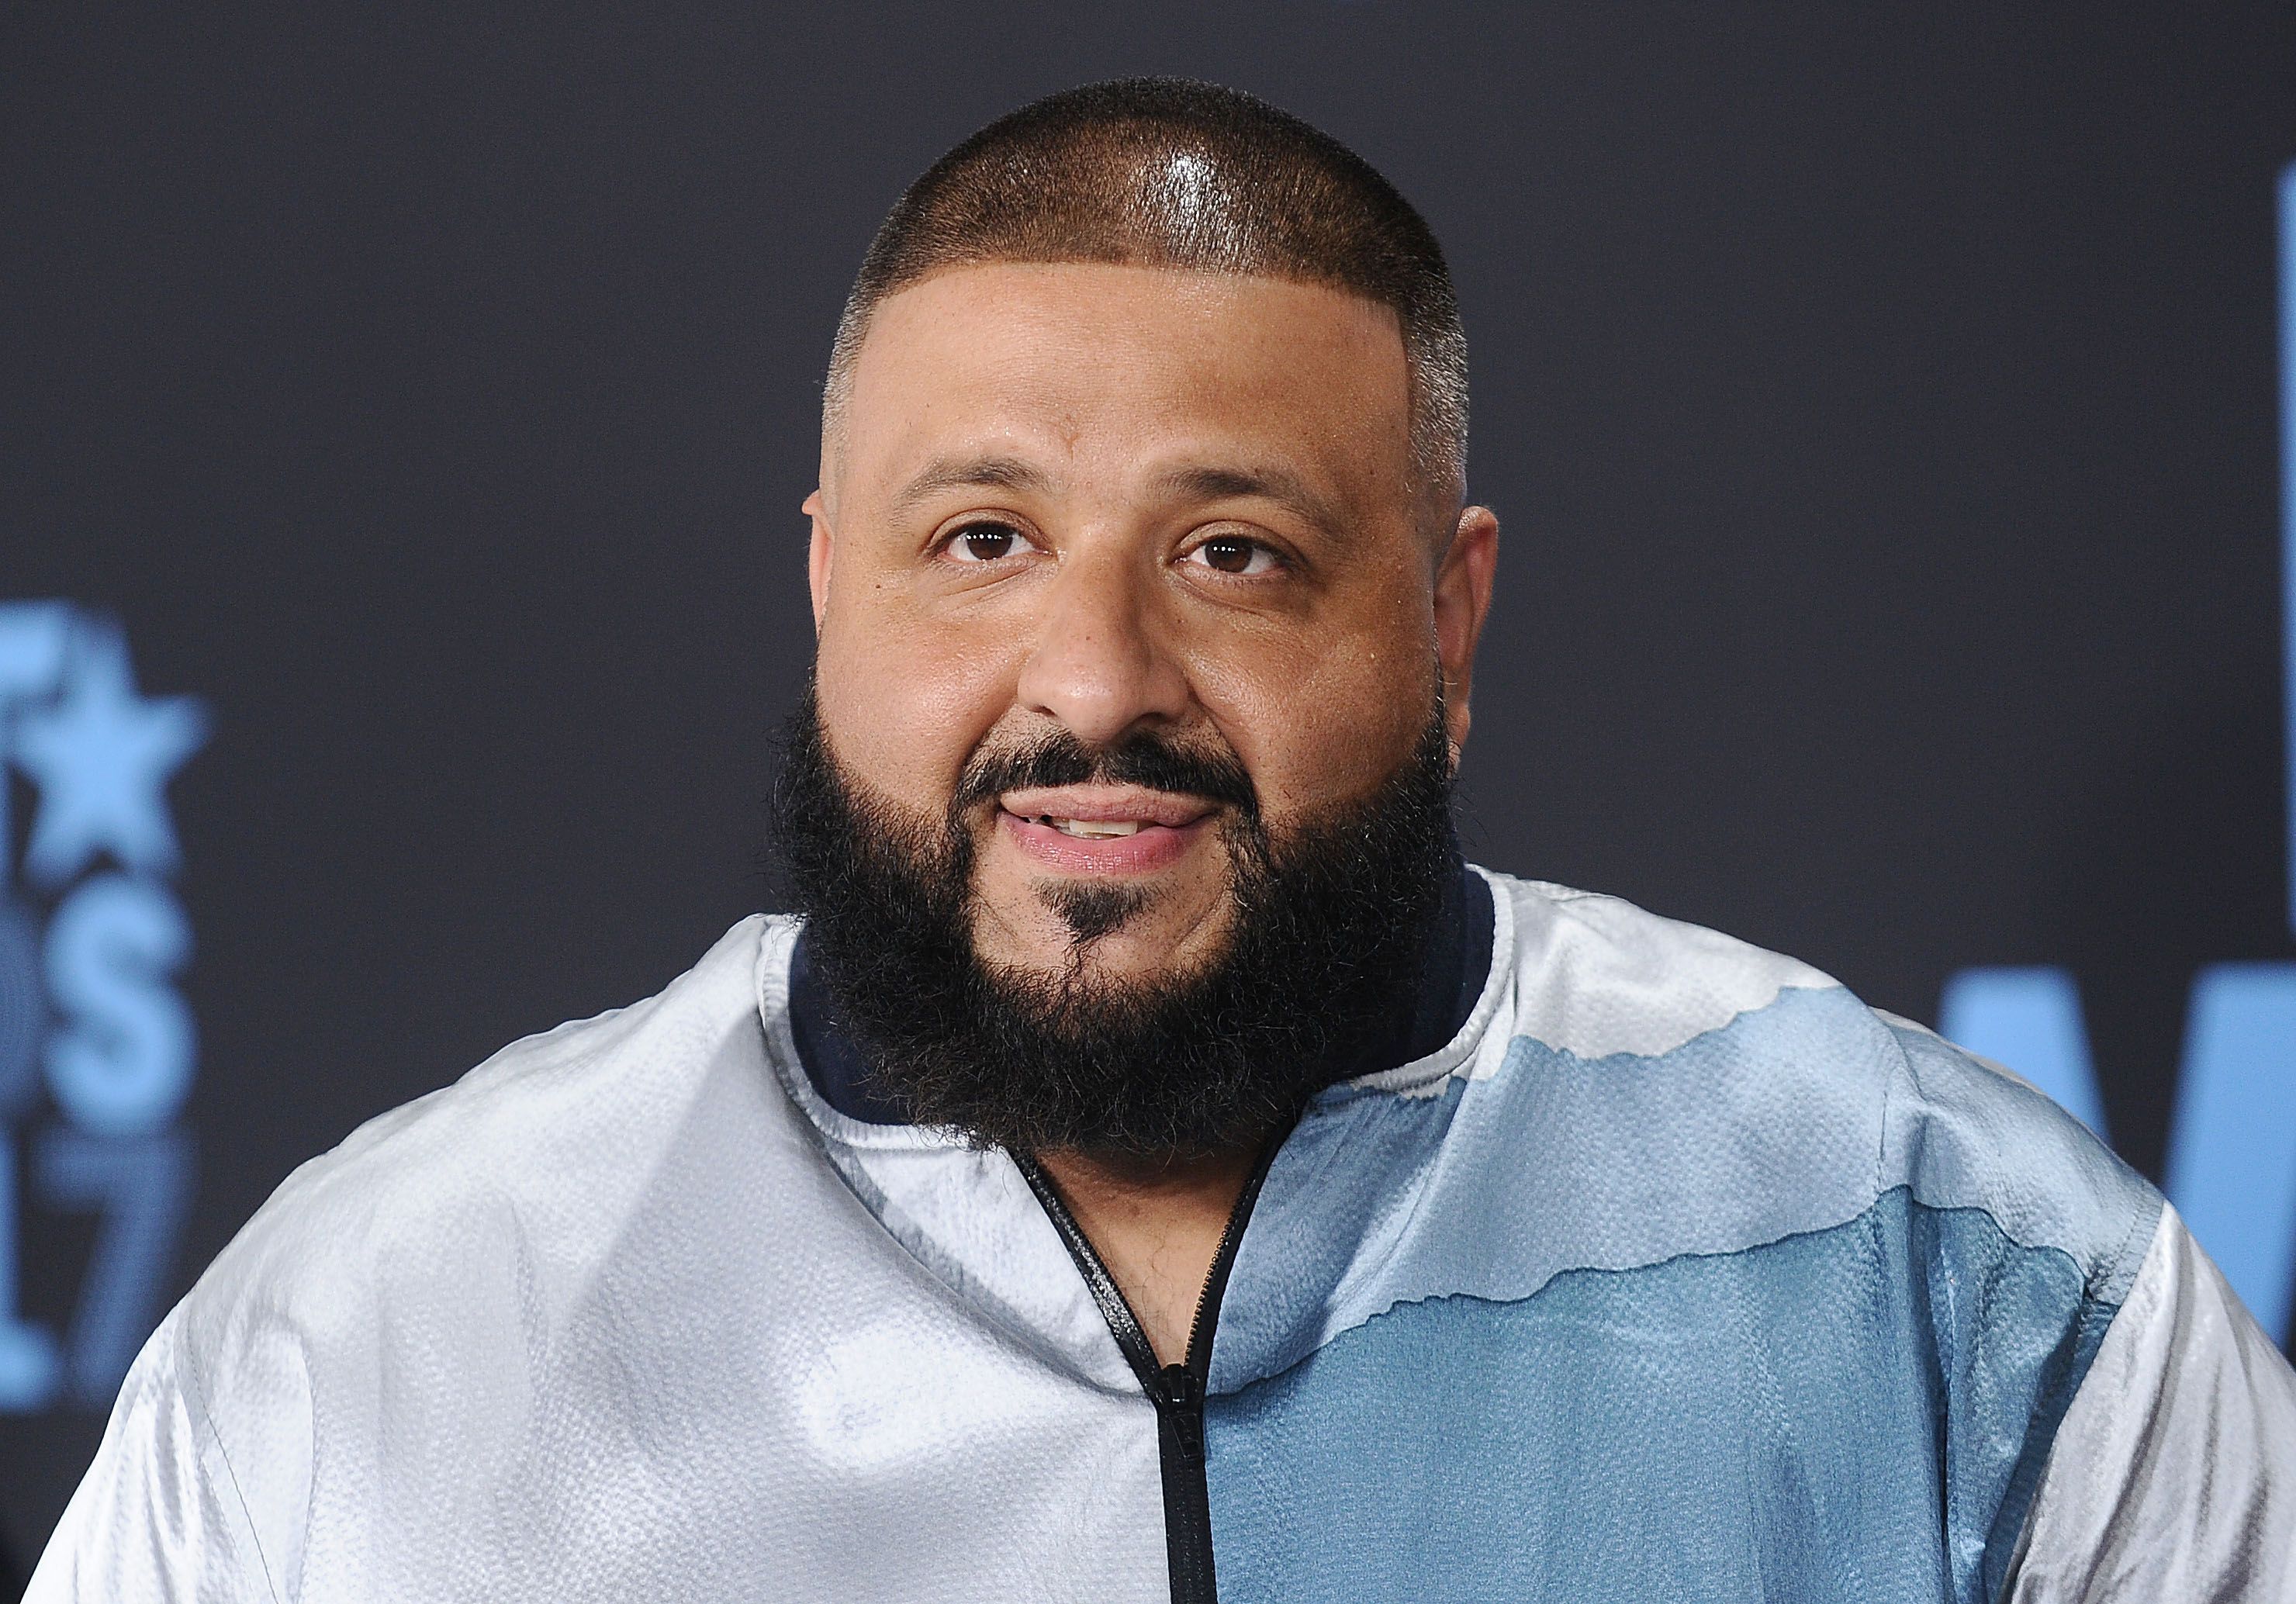 DJ Khaled during the 2017 BET Awards at Microsoft Theater on June 25, 2017 in Los Angeles, California. | Source: Getty Images